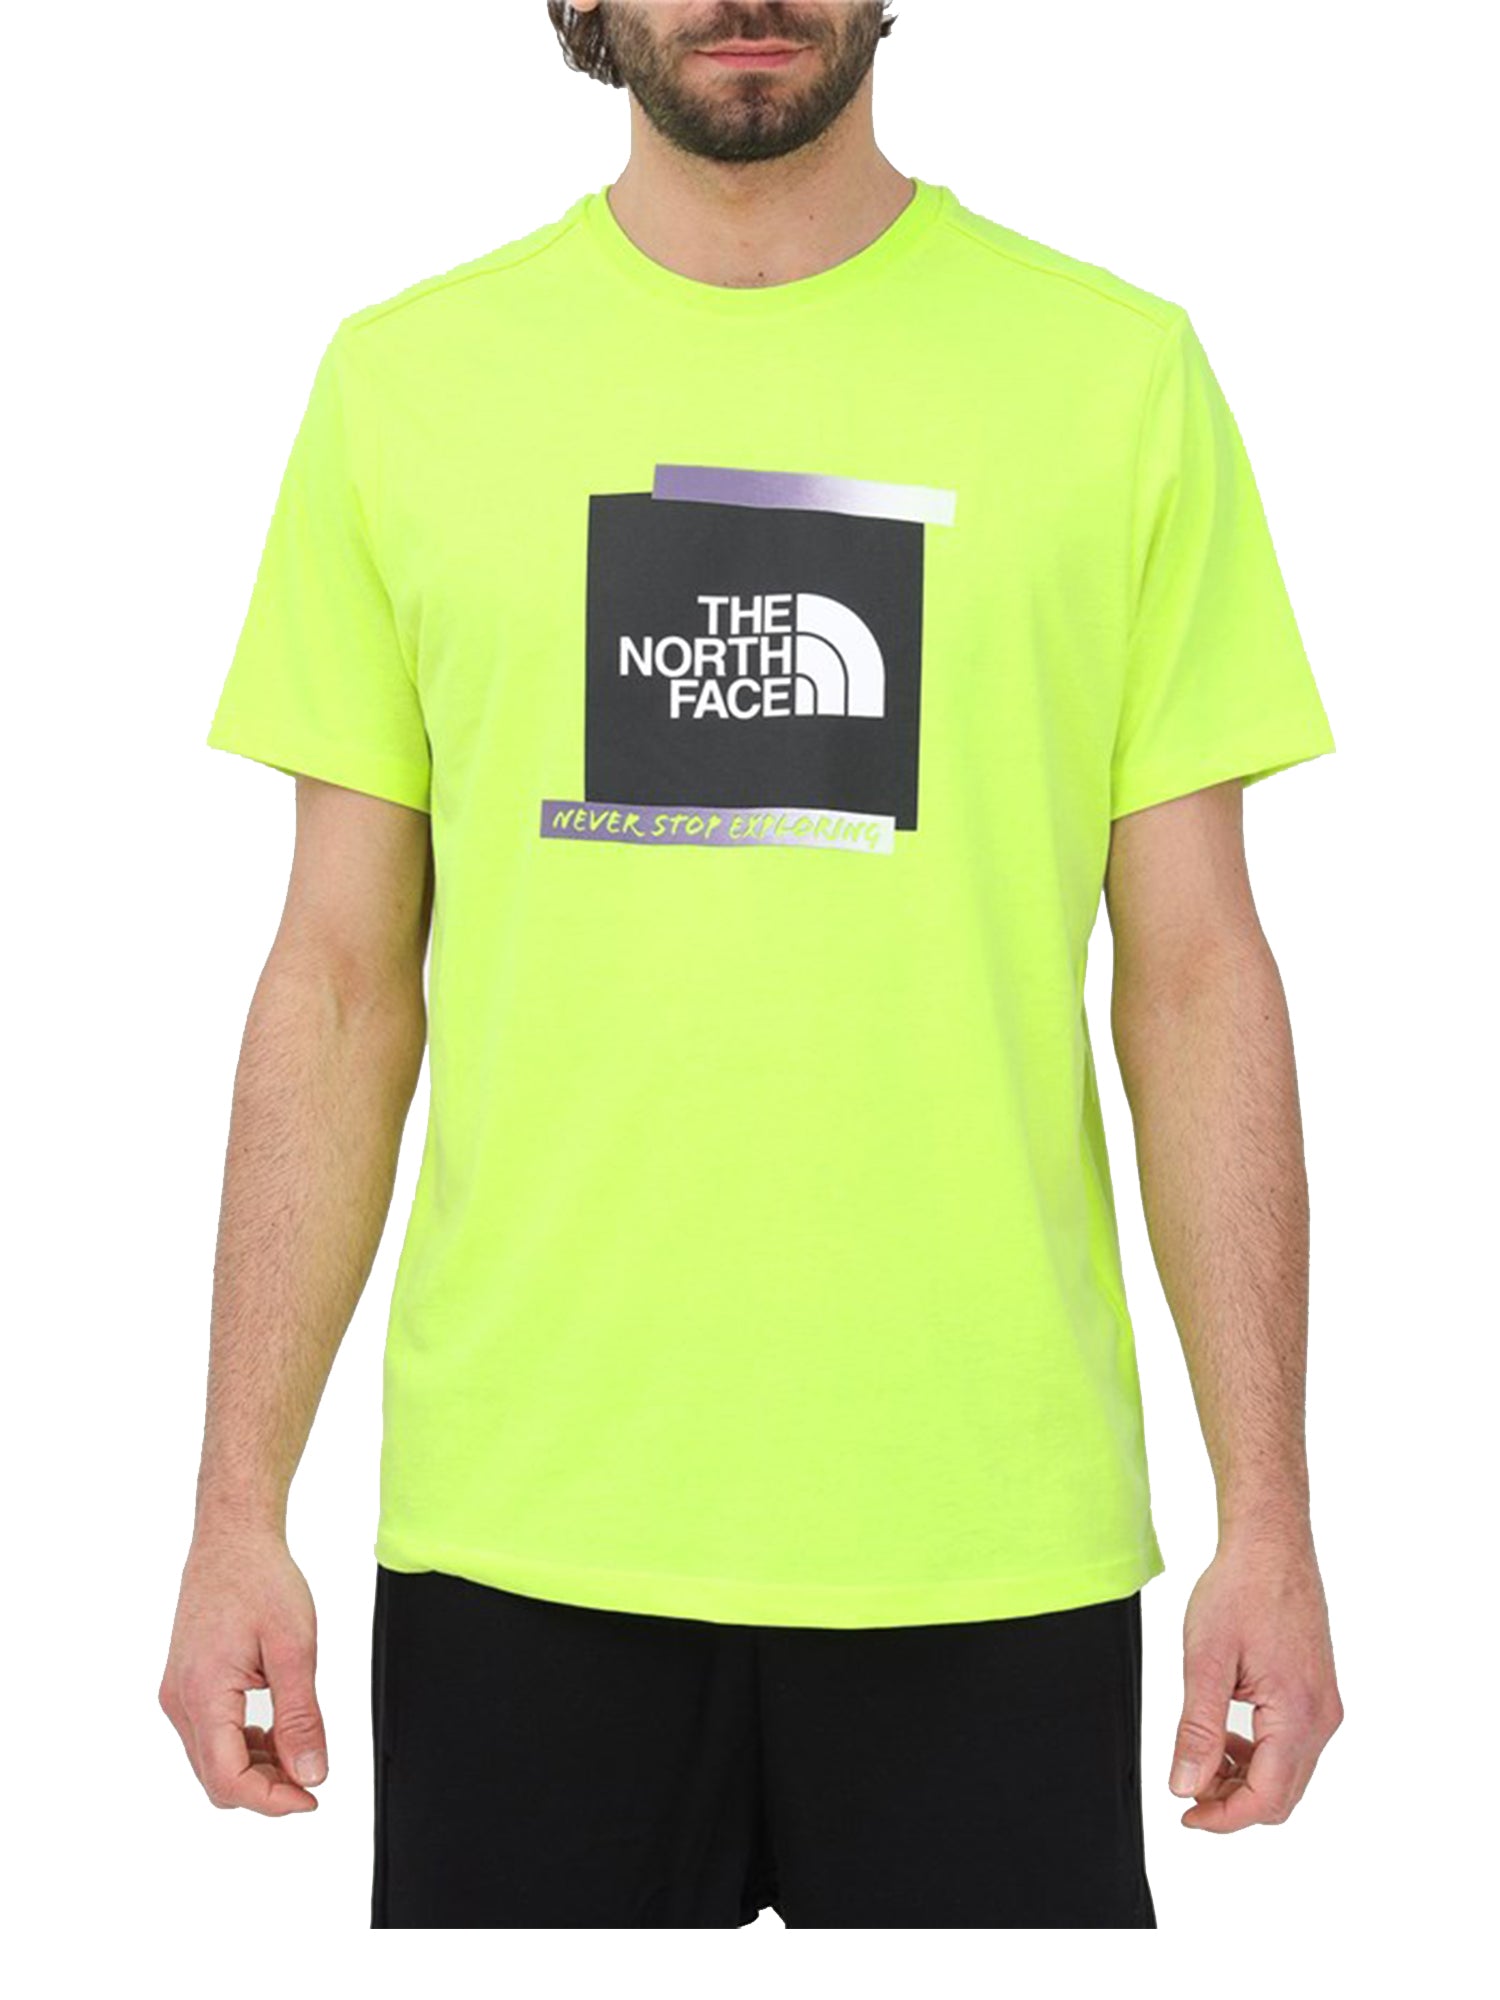 THE NORTH FACE T-SHIRT GRAPHIC GIALLO LED